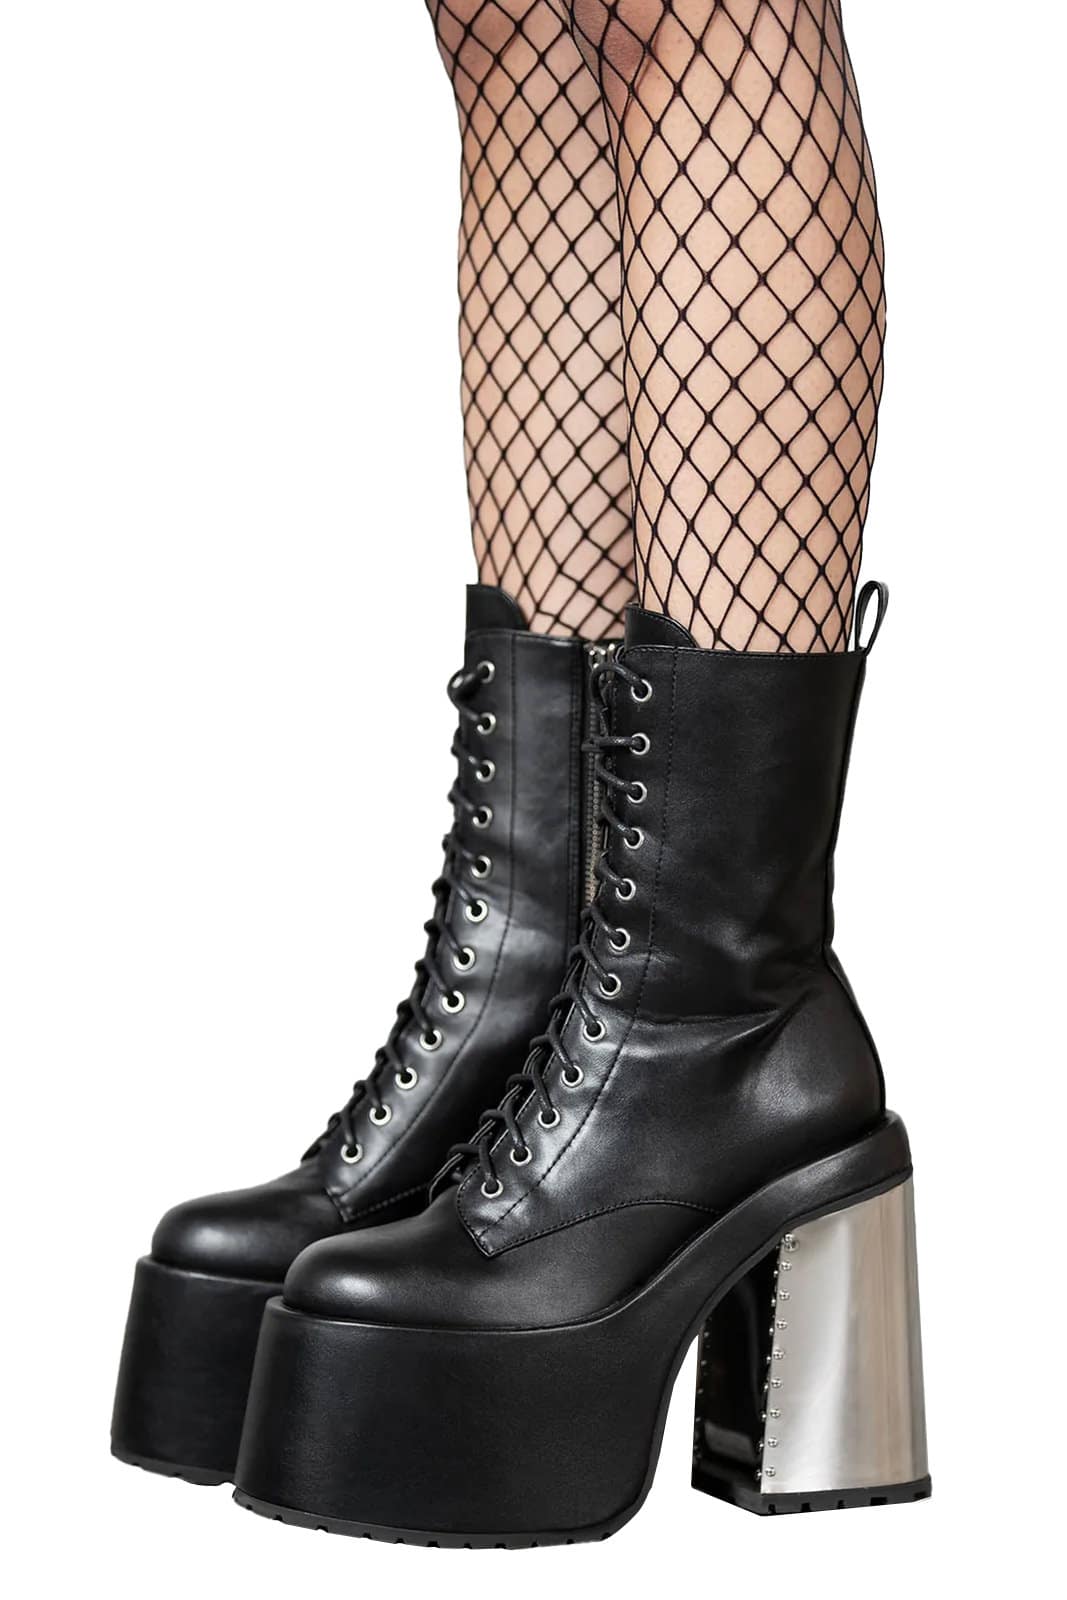 KILLSTAR shoes and boots - Wonderland 13 Store